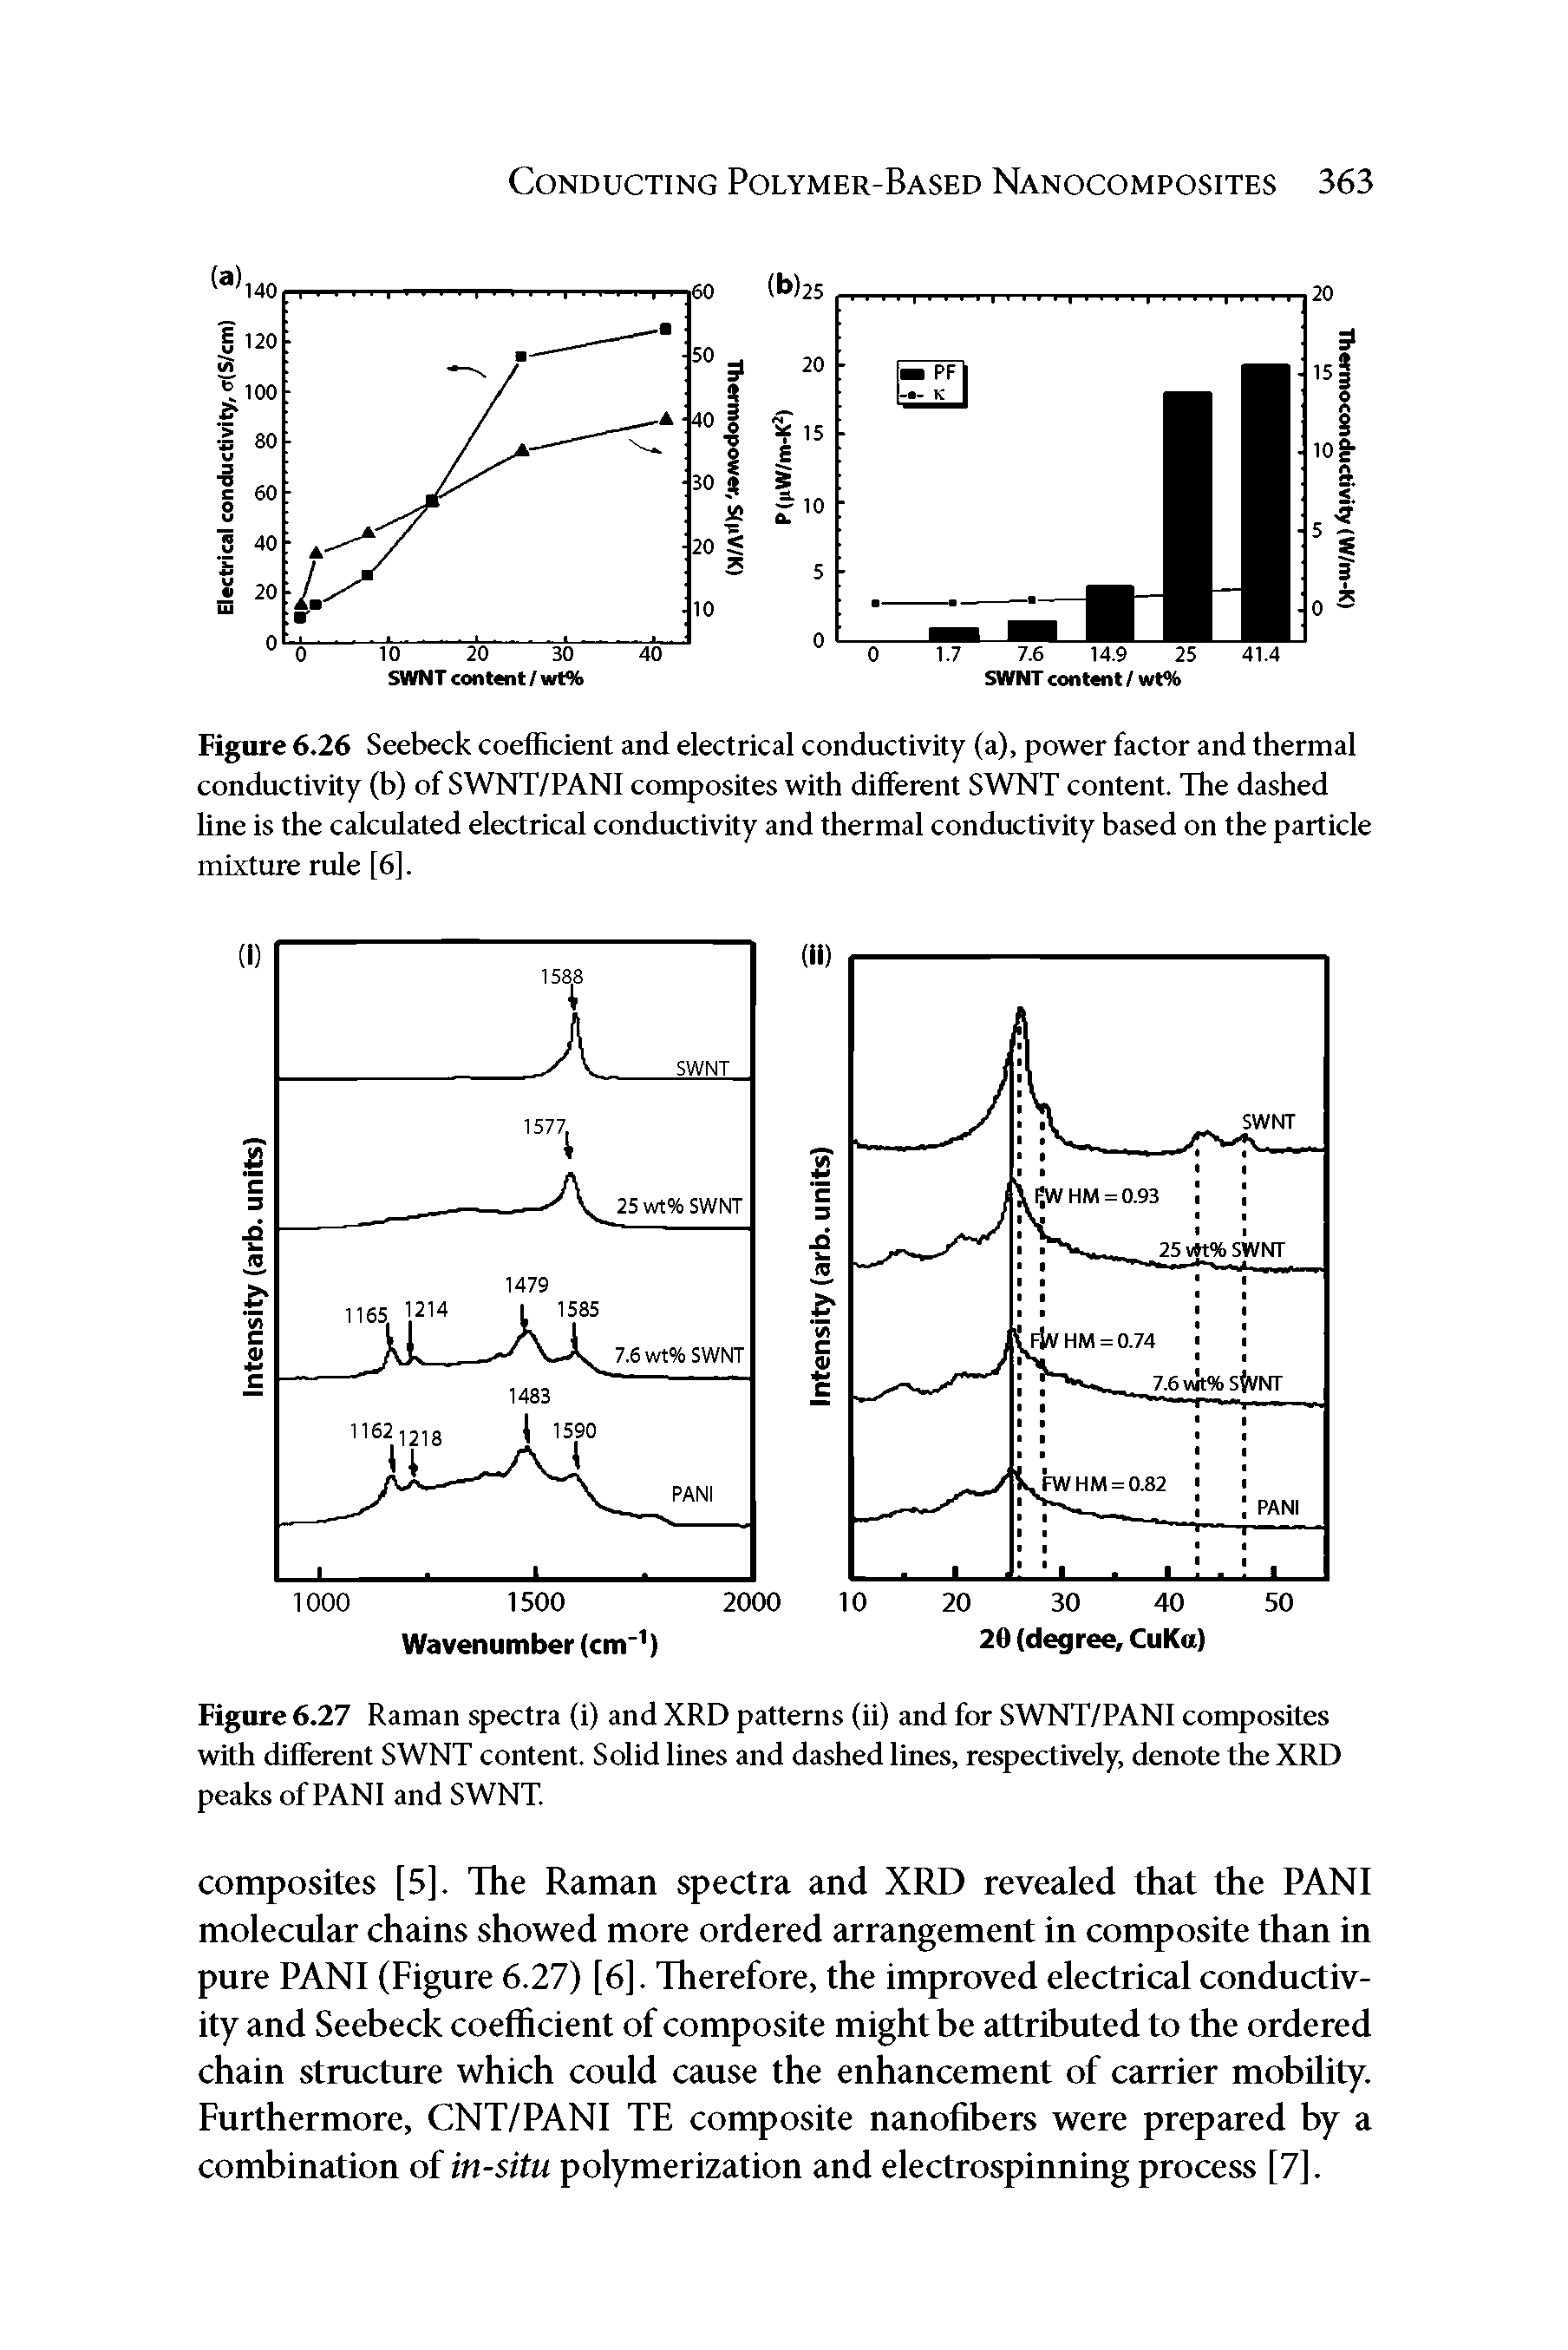 Figure 6.26 Seebeck coefficient and electrical conductivity (a), power factor and thermal conductivity (b) of SWNT/PANI composites with different SWNT content. The dashed line is the calculated electrical conductivity and thermal conductivity based on the particle mixture rule [6].